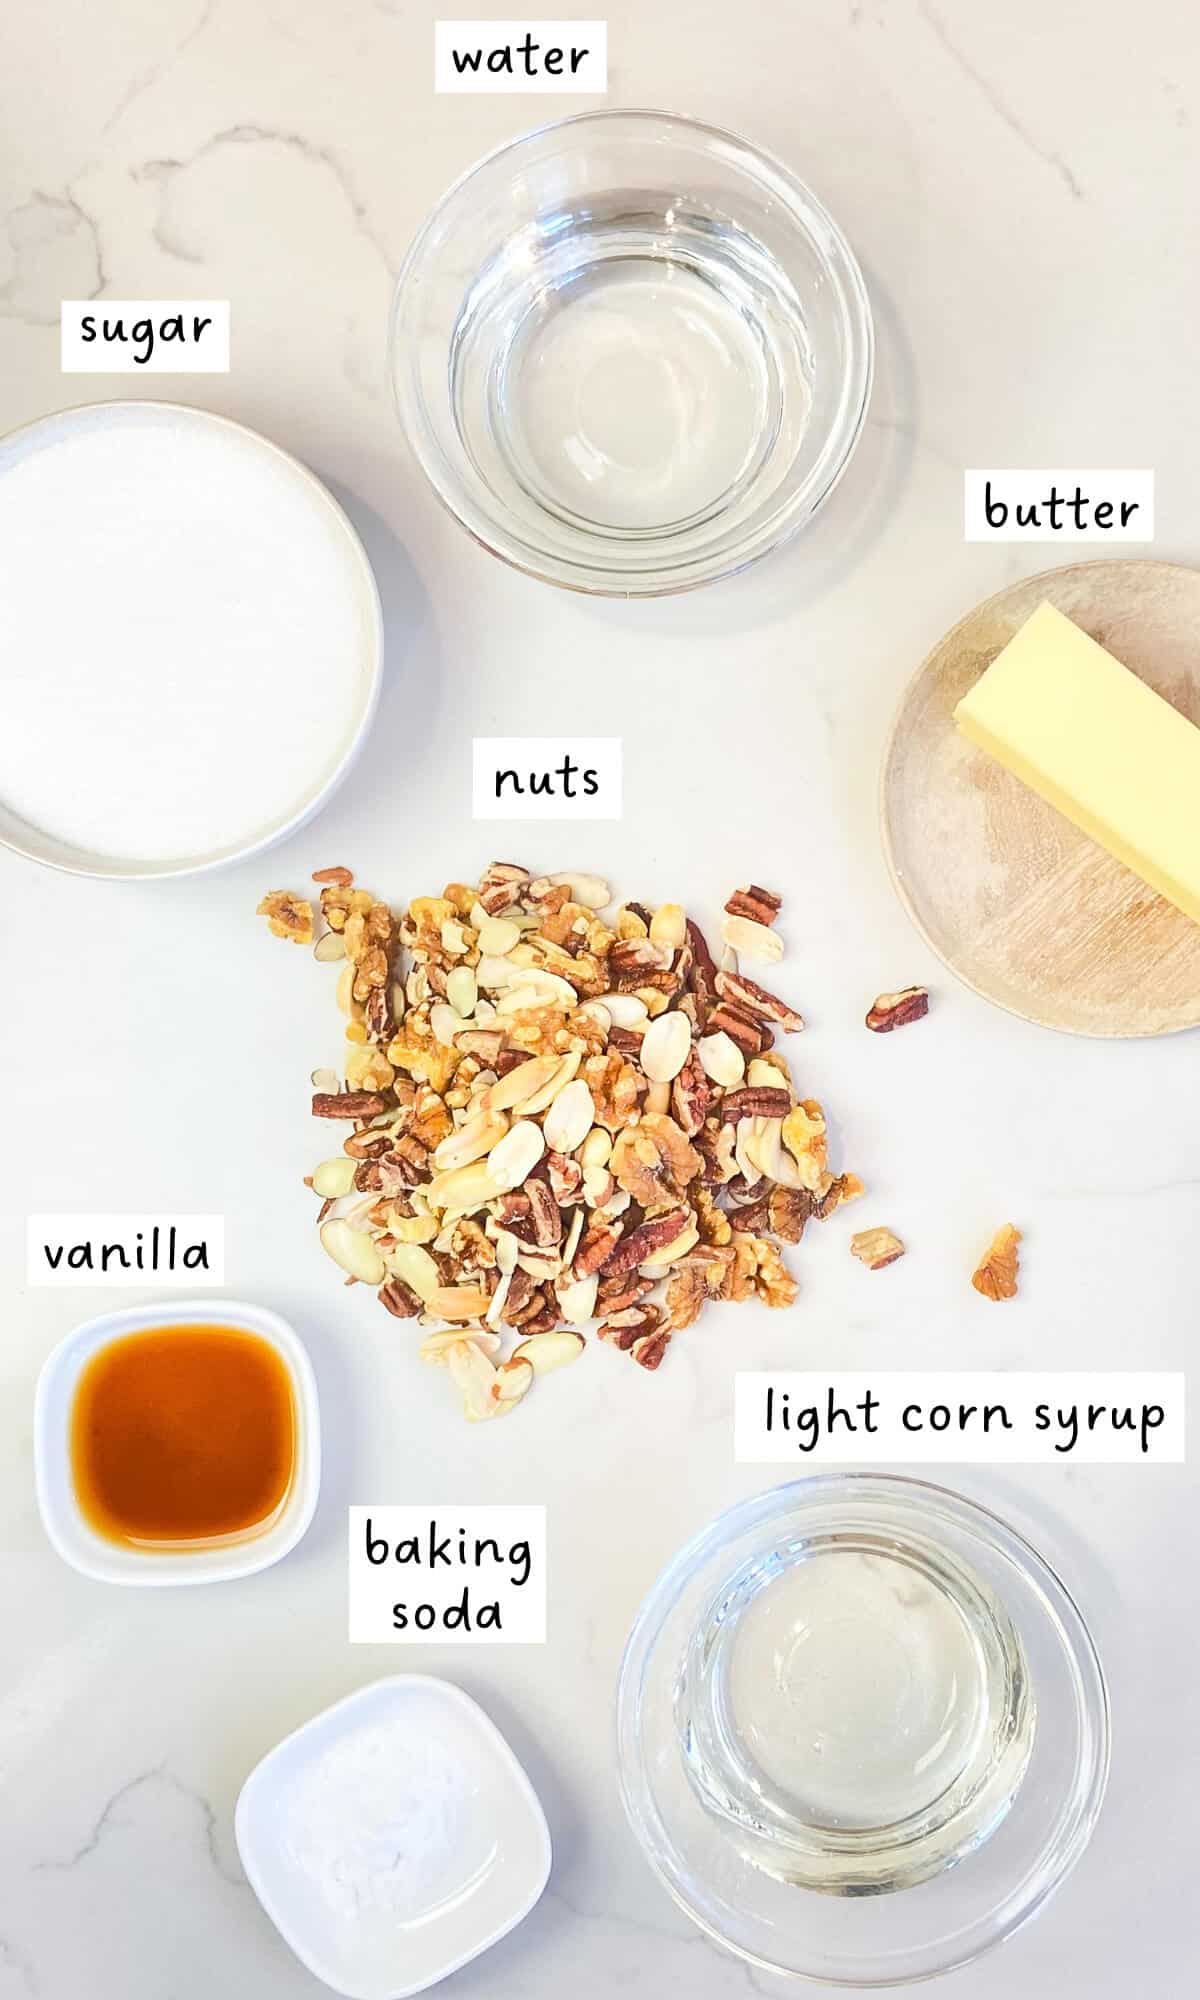 7 ingredients laid out on a white countertop.